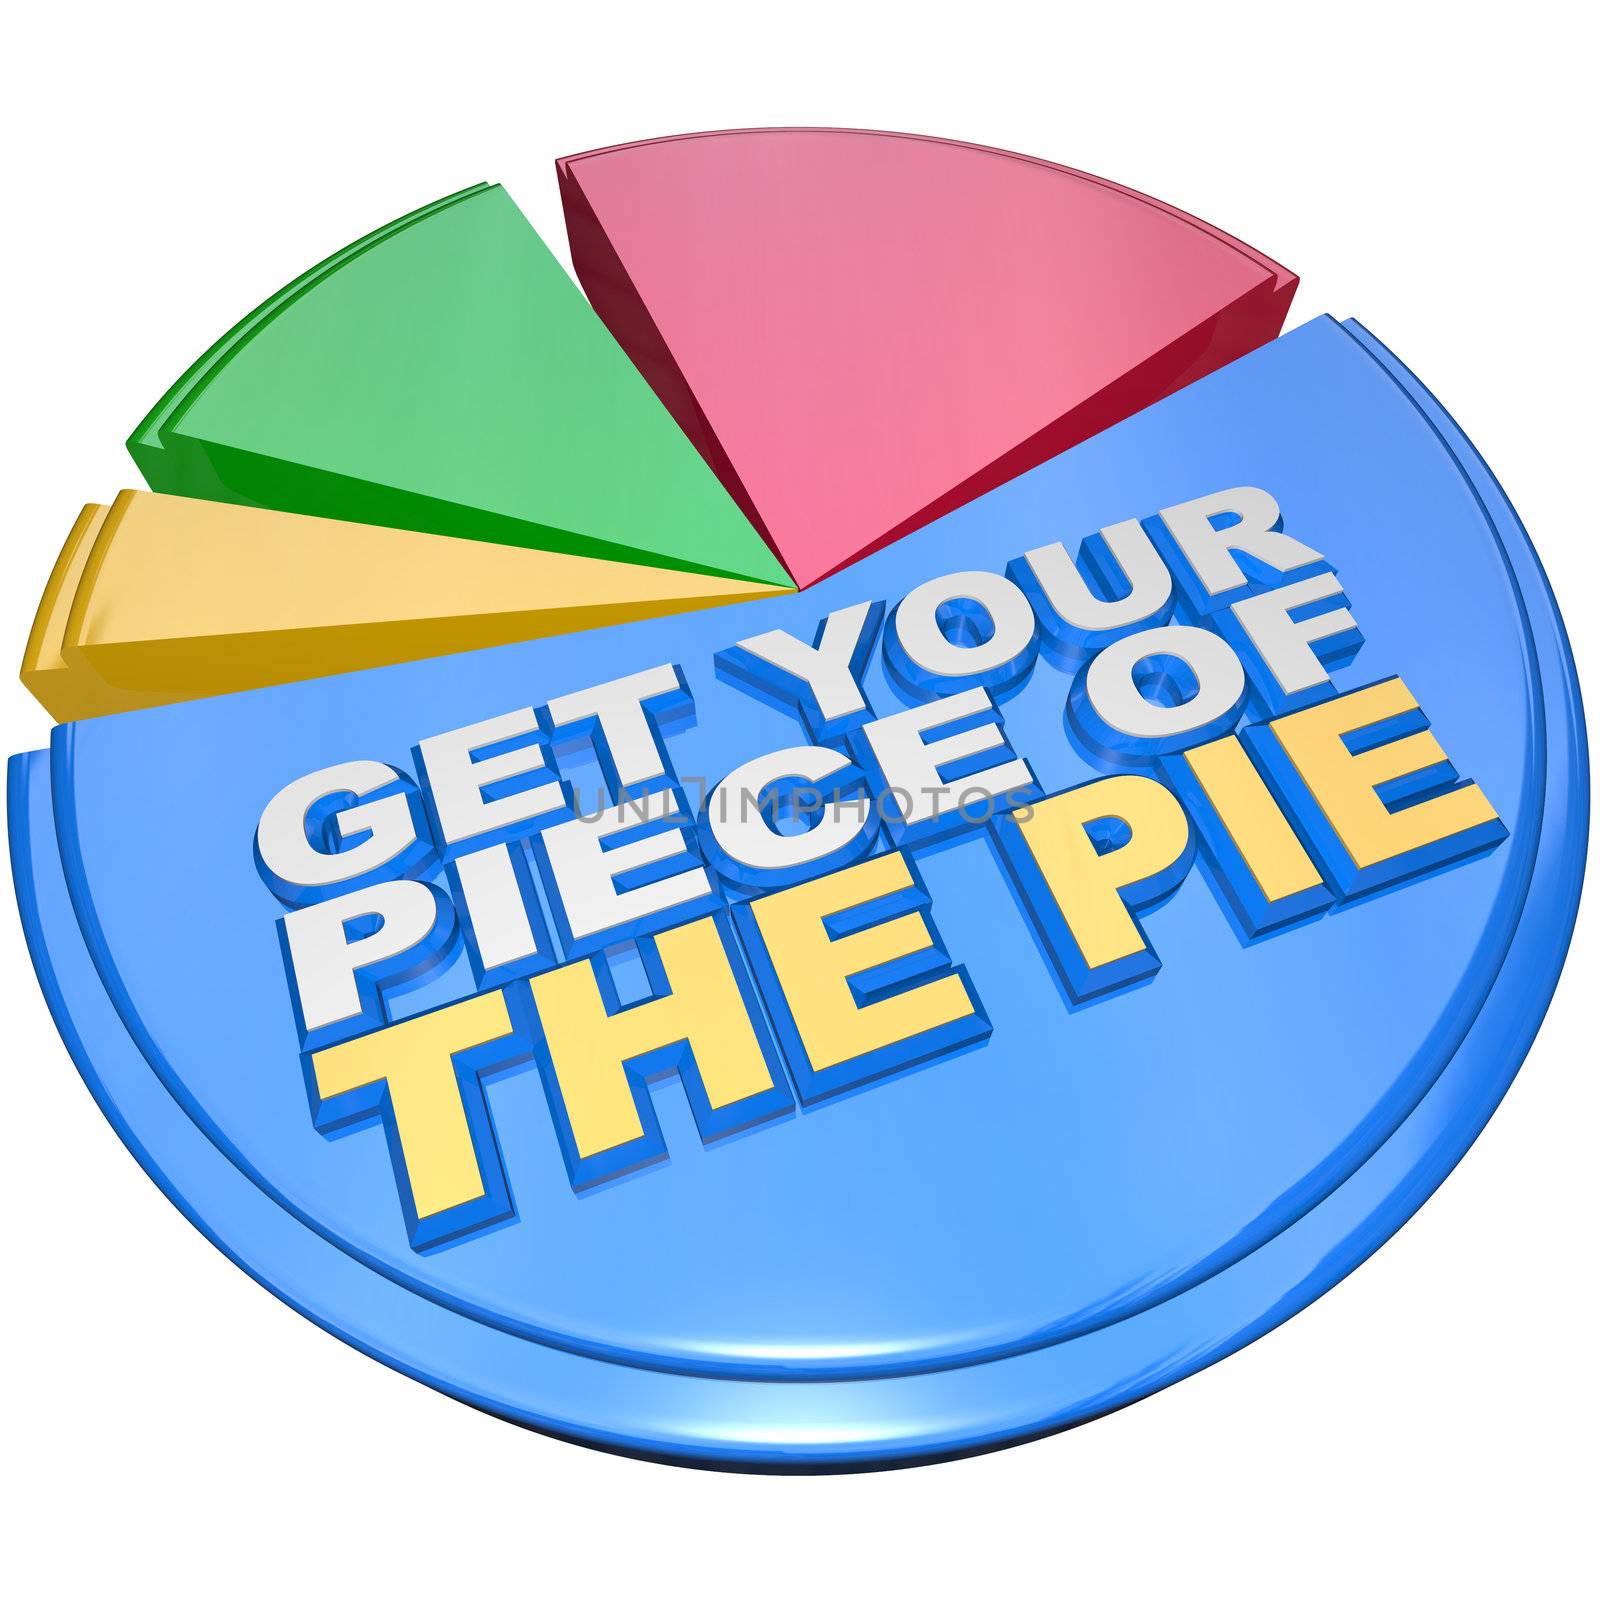 Get Your Piece of The Pie Chart Measuring Wealth and Riches by iQoncept